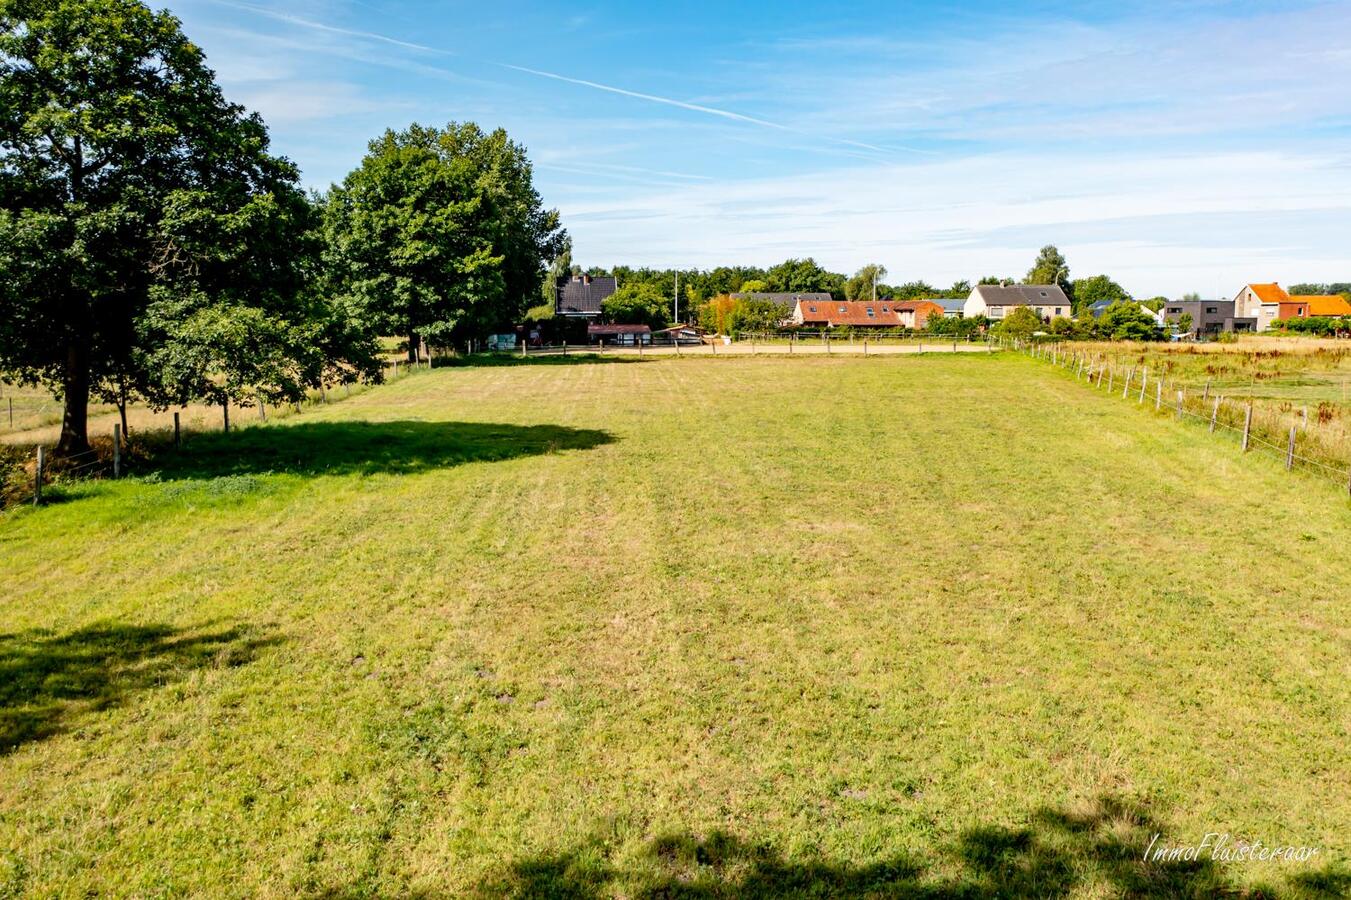 Property for sale |  with option - with restrictions in Aarschot